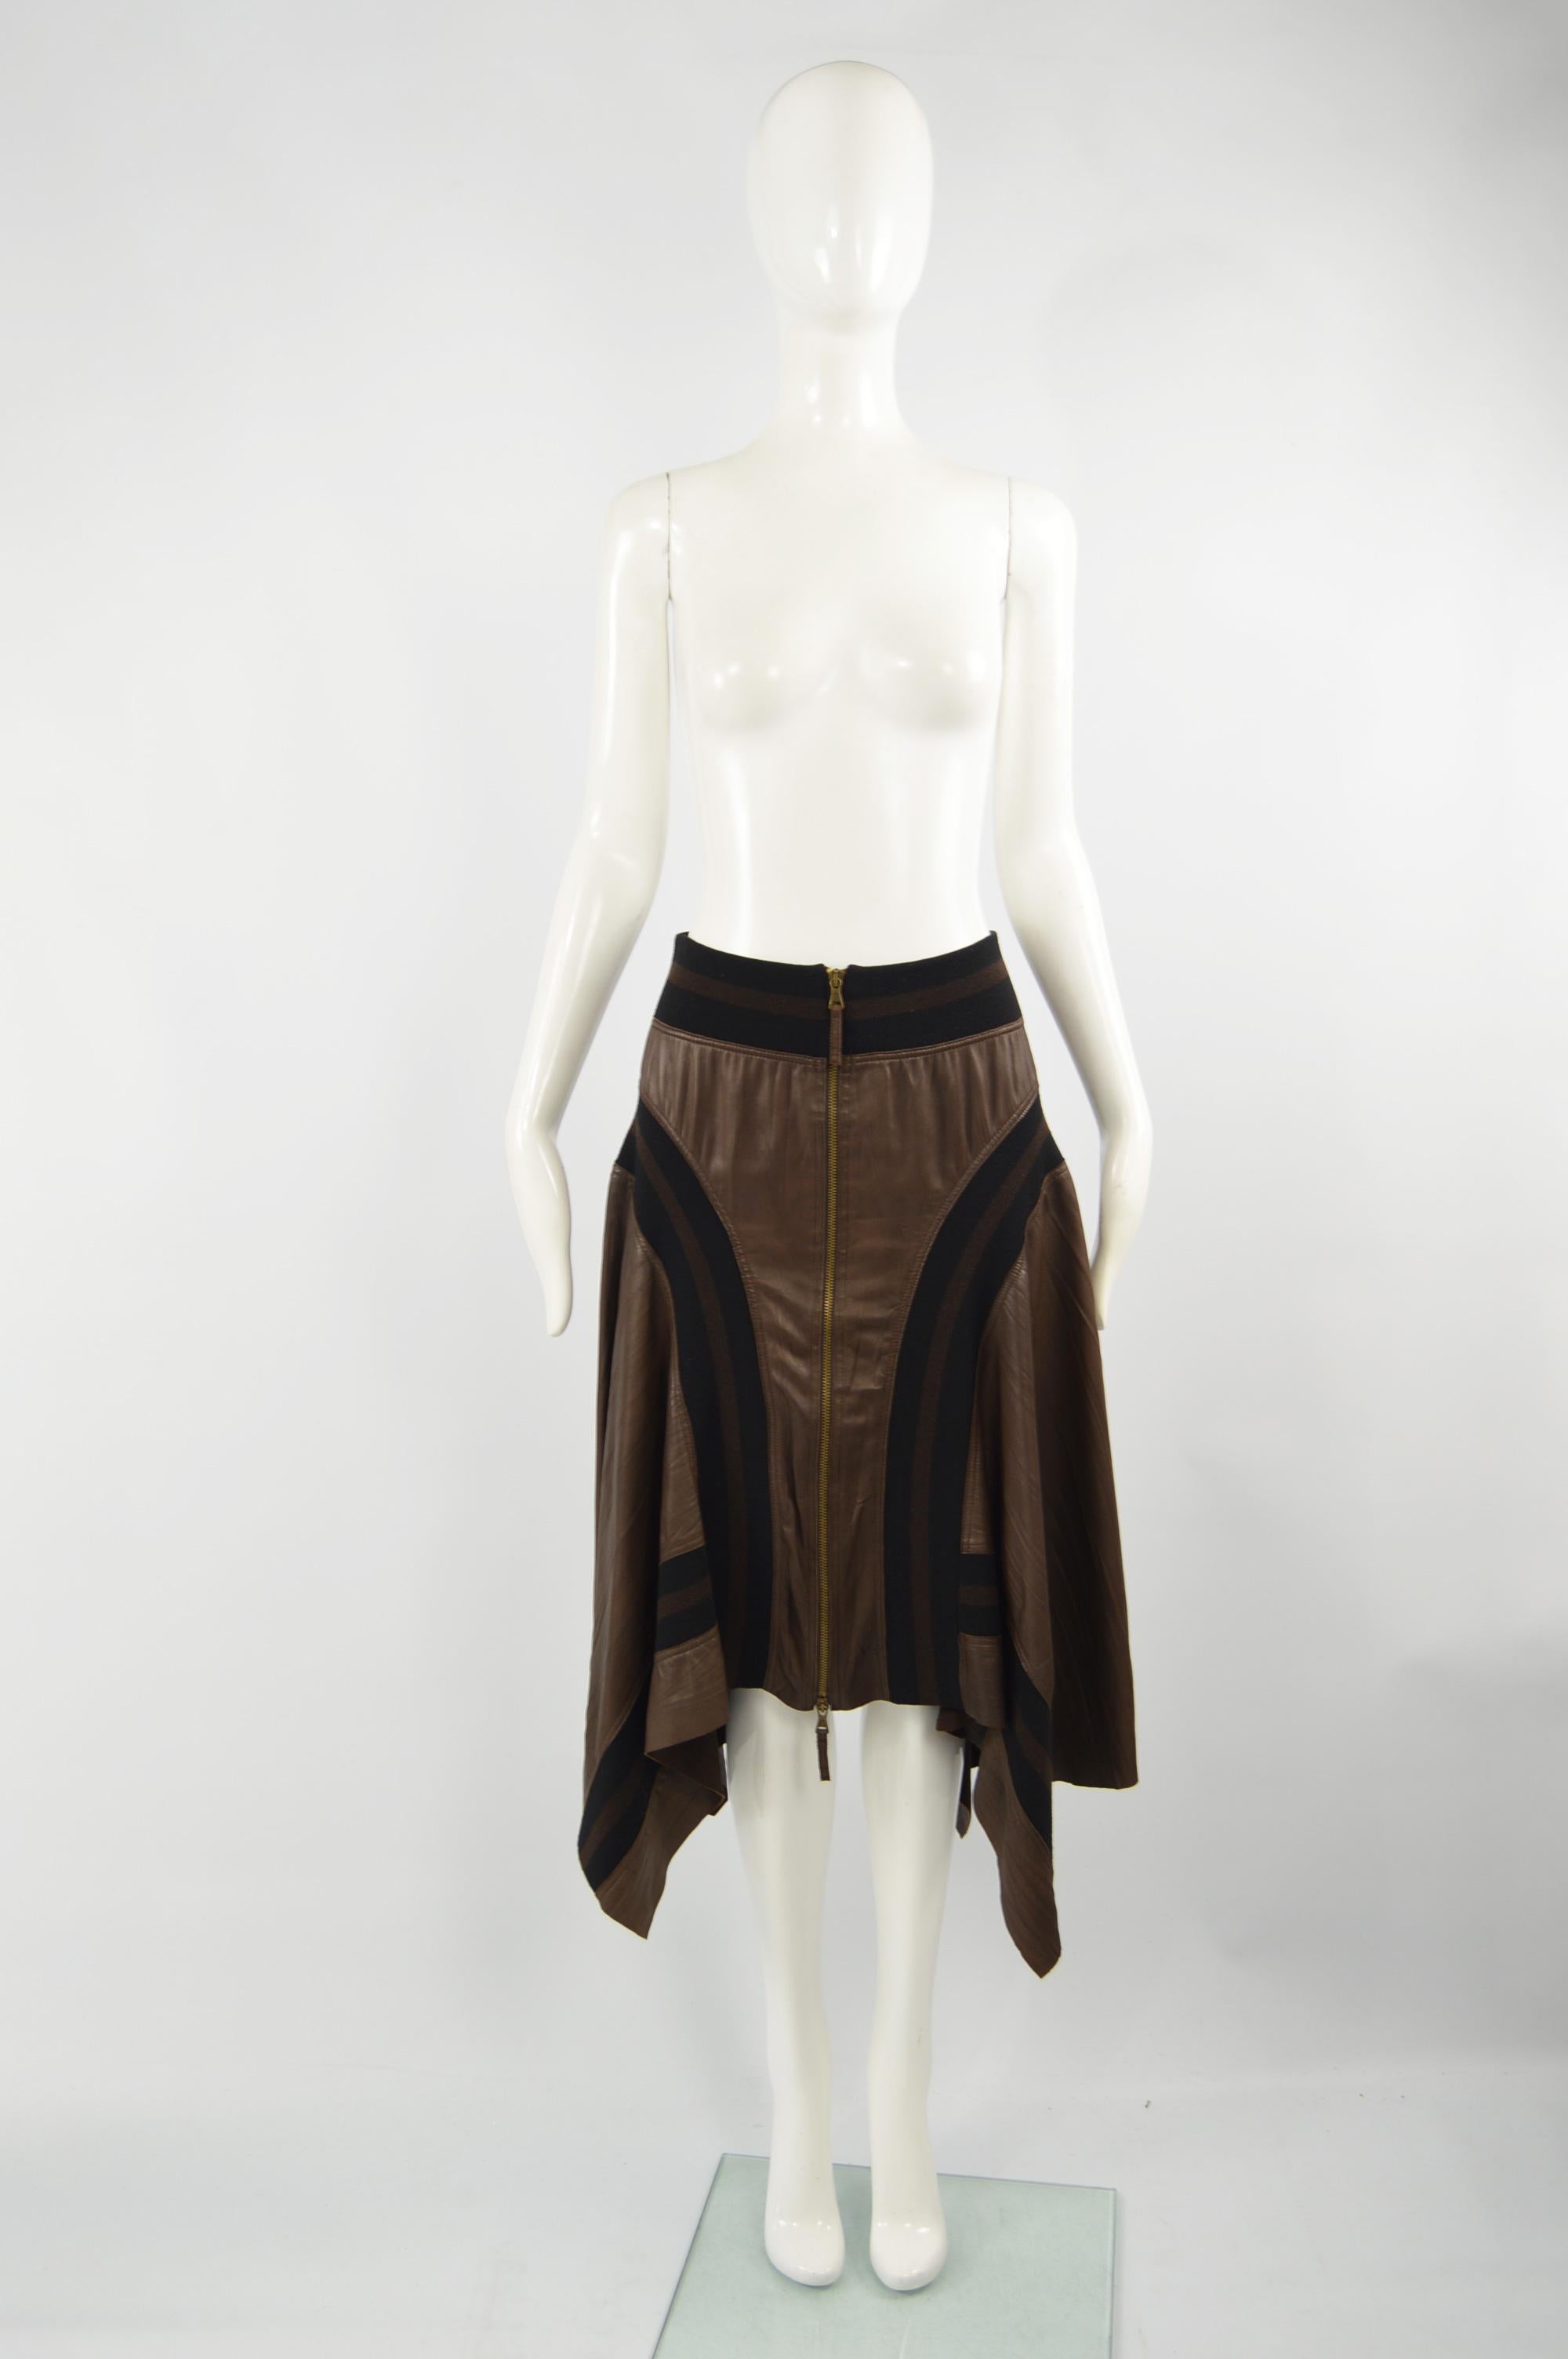 Jean Paul Gaultier Brown Sheepskin Leather Vintage Asymmetrical Hem Skirt, 1990s

Size: Marked I 44 / D 40 / F 40 / GB 12 / US 10 
Waist - Stretches up to 32” / 81cm
Hips - Up to 52” / 132cm
Length (Waist to Hem) - 33” / 84cm

Condition: Very Good